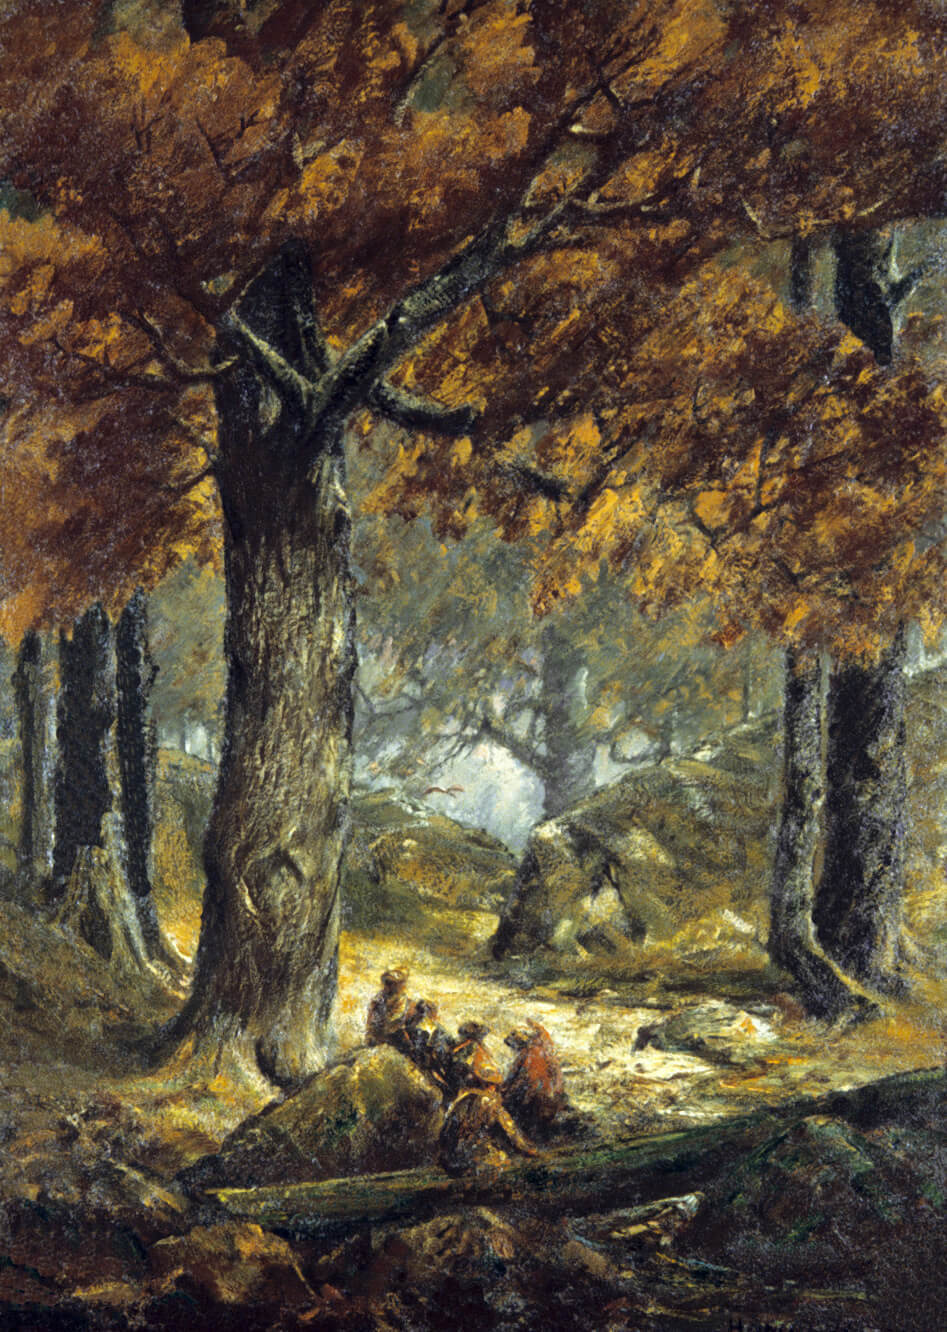 Nut Gatherers in the Forest, 1900, by Homer Watson